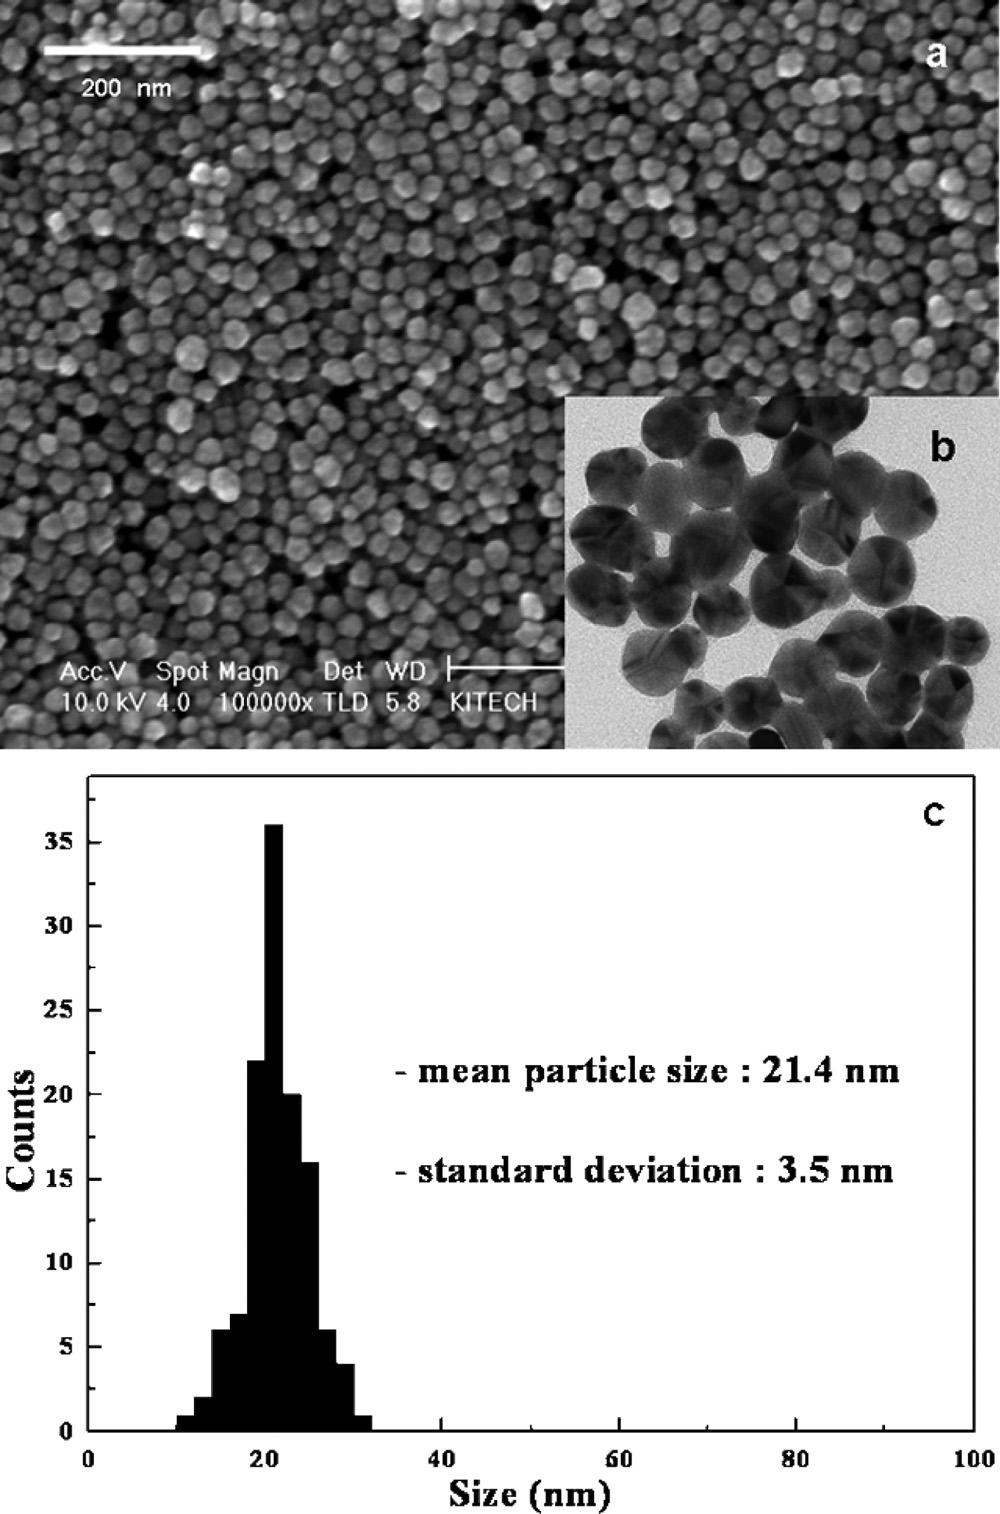 48=[340] D. Kim et al. FIGURE 1 (a) SEM and (b) TEM images of the synthesized silver nano particles for conductive ink and (c) particle size distribution by image analysis.